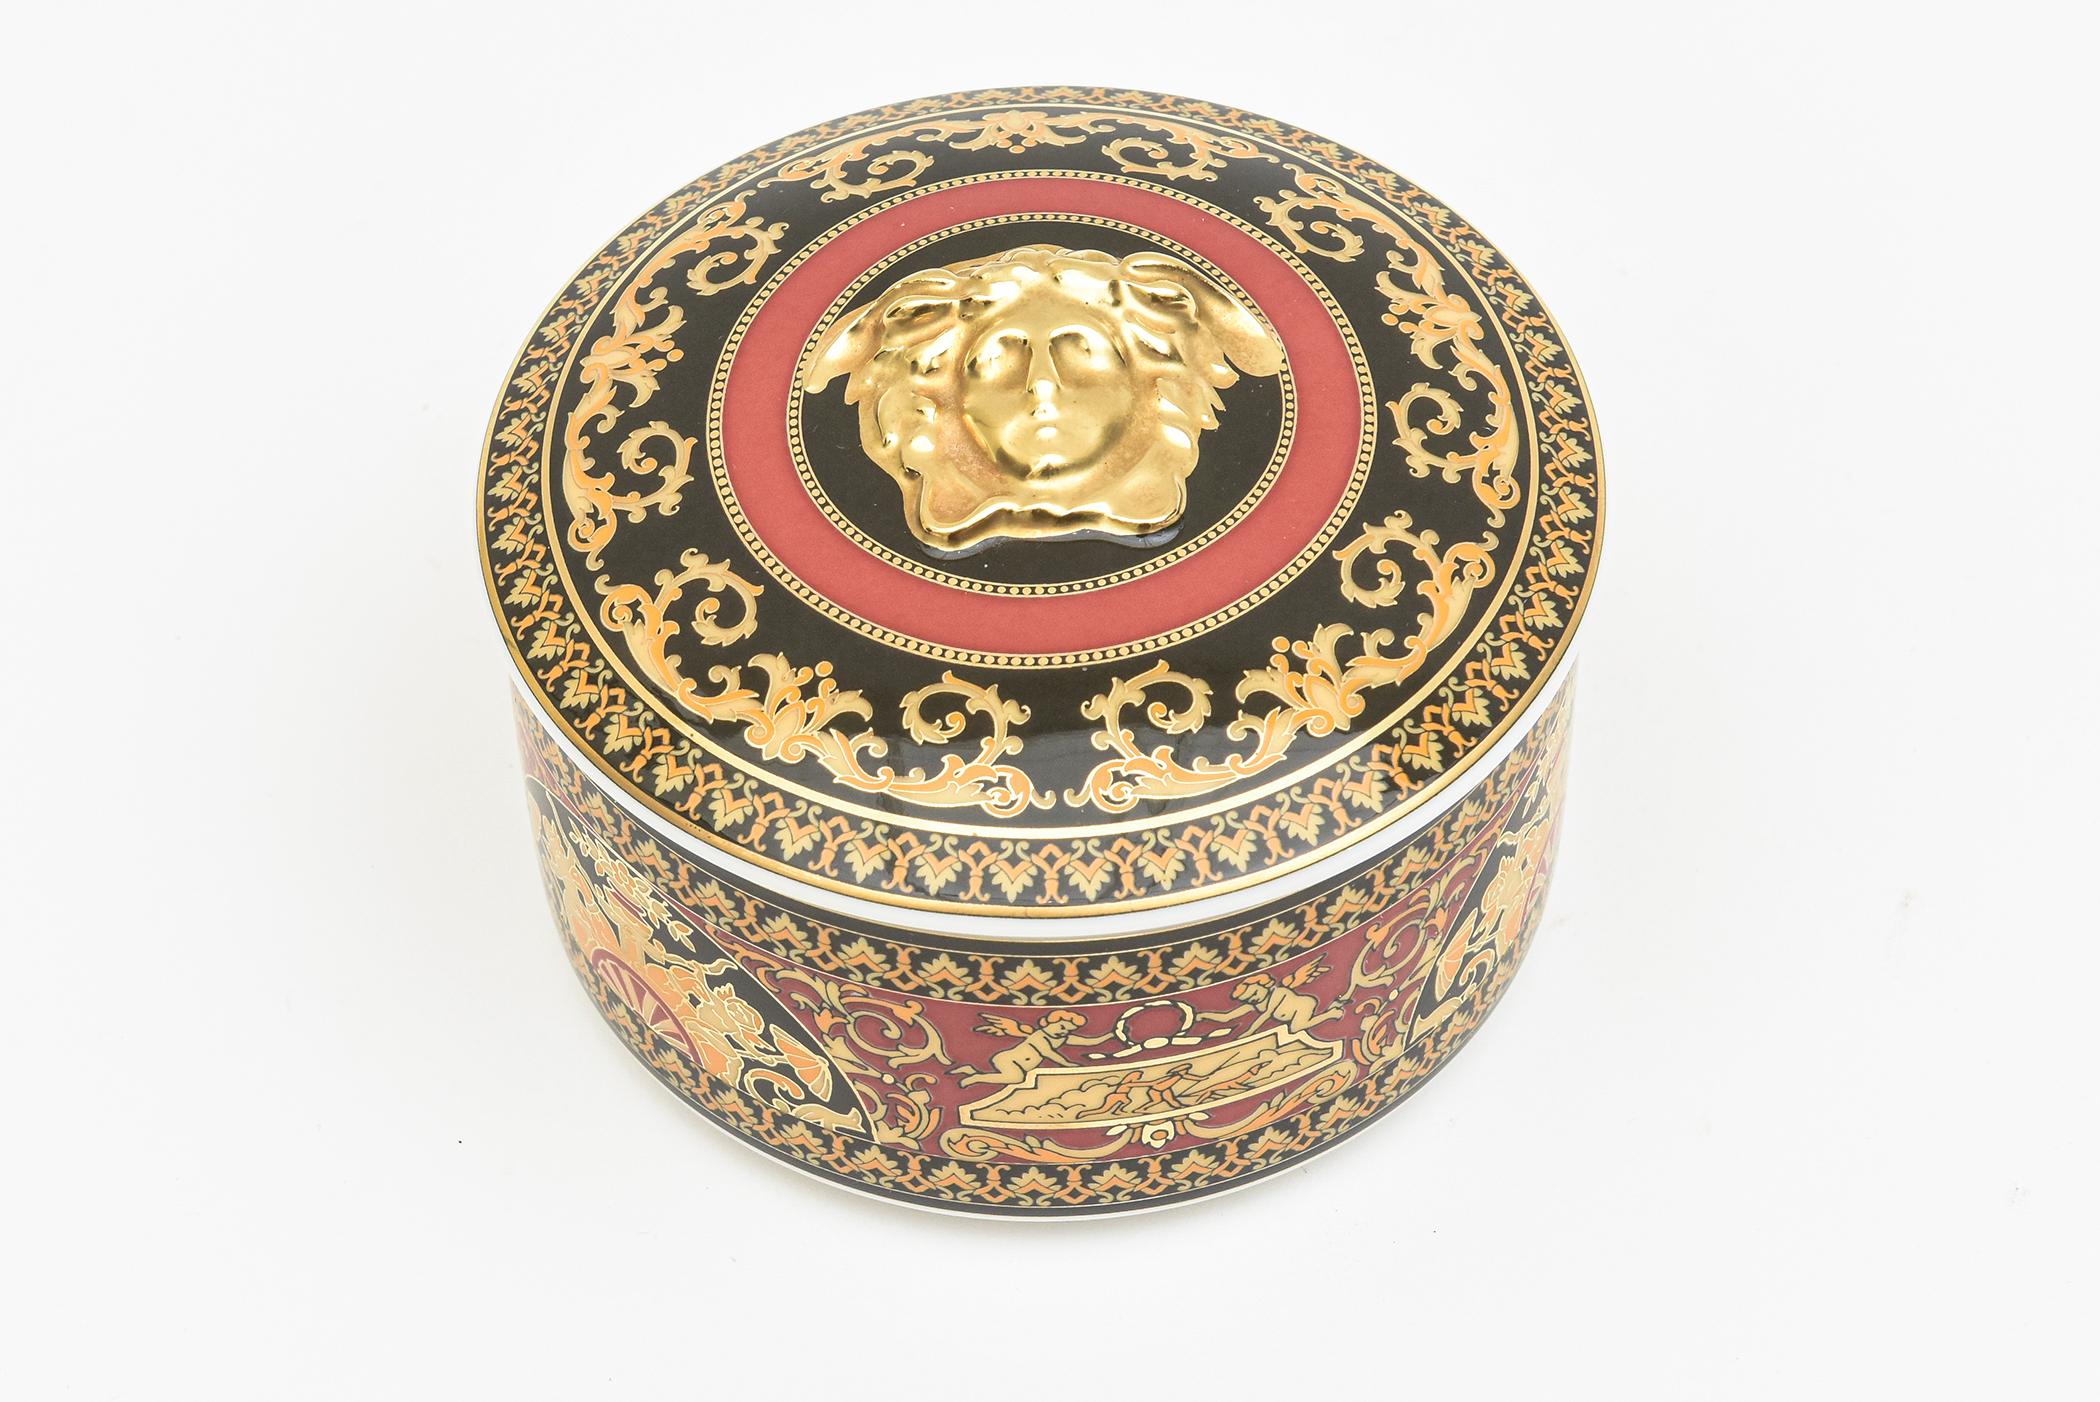 This lovely Rosenthal Studio LIne Germany porcelain 2 part round box was designed by the Versace Home Collection and has the fabulous Medusa head and from the Medusa collection. It is raised on the top of gold plate. The inside of the box is the